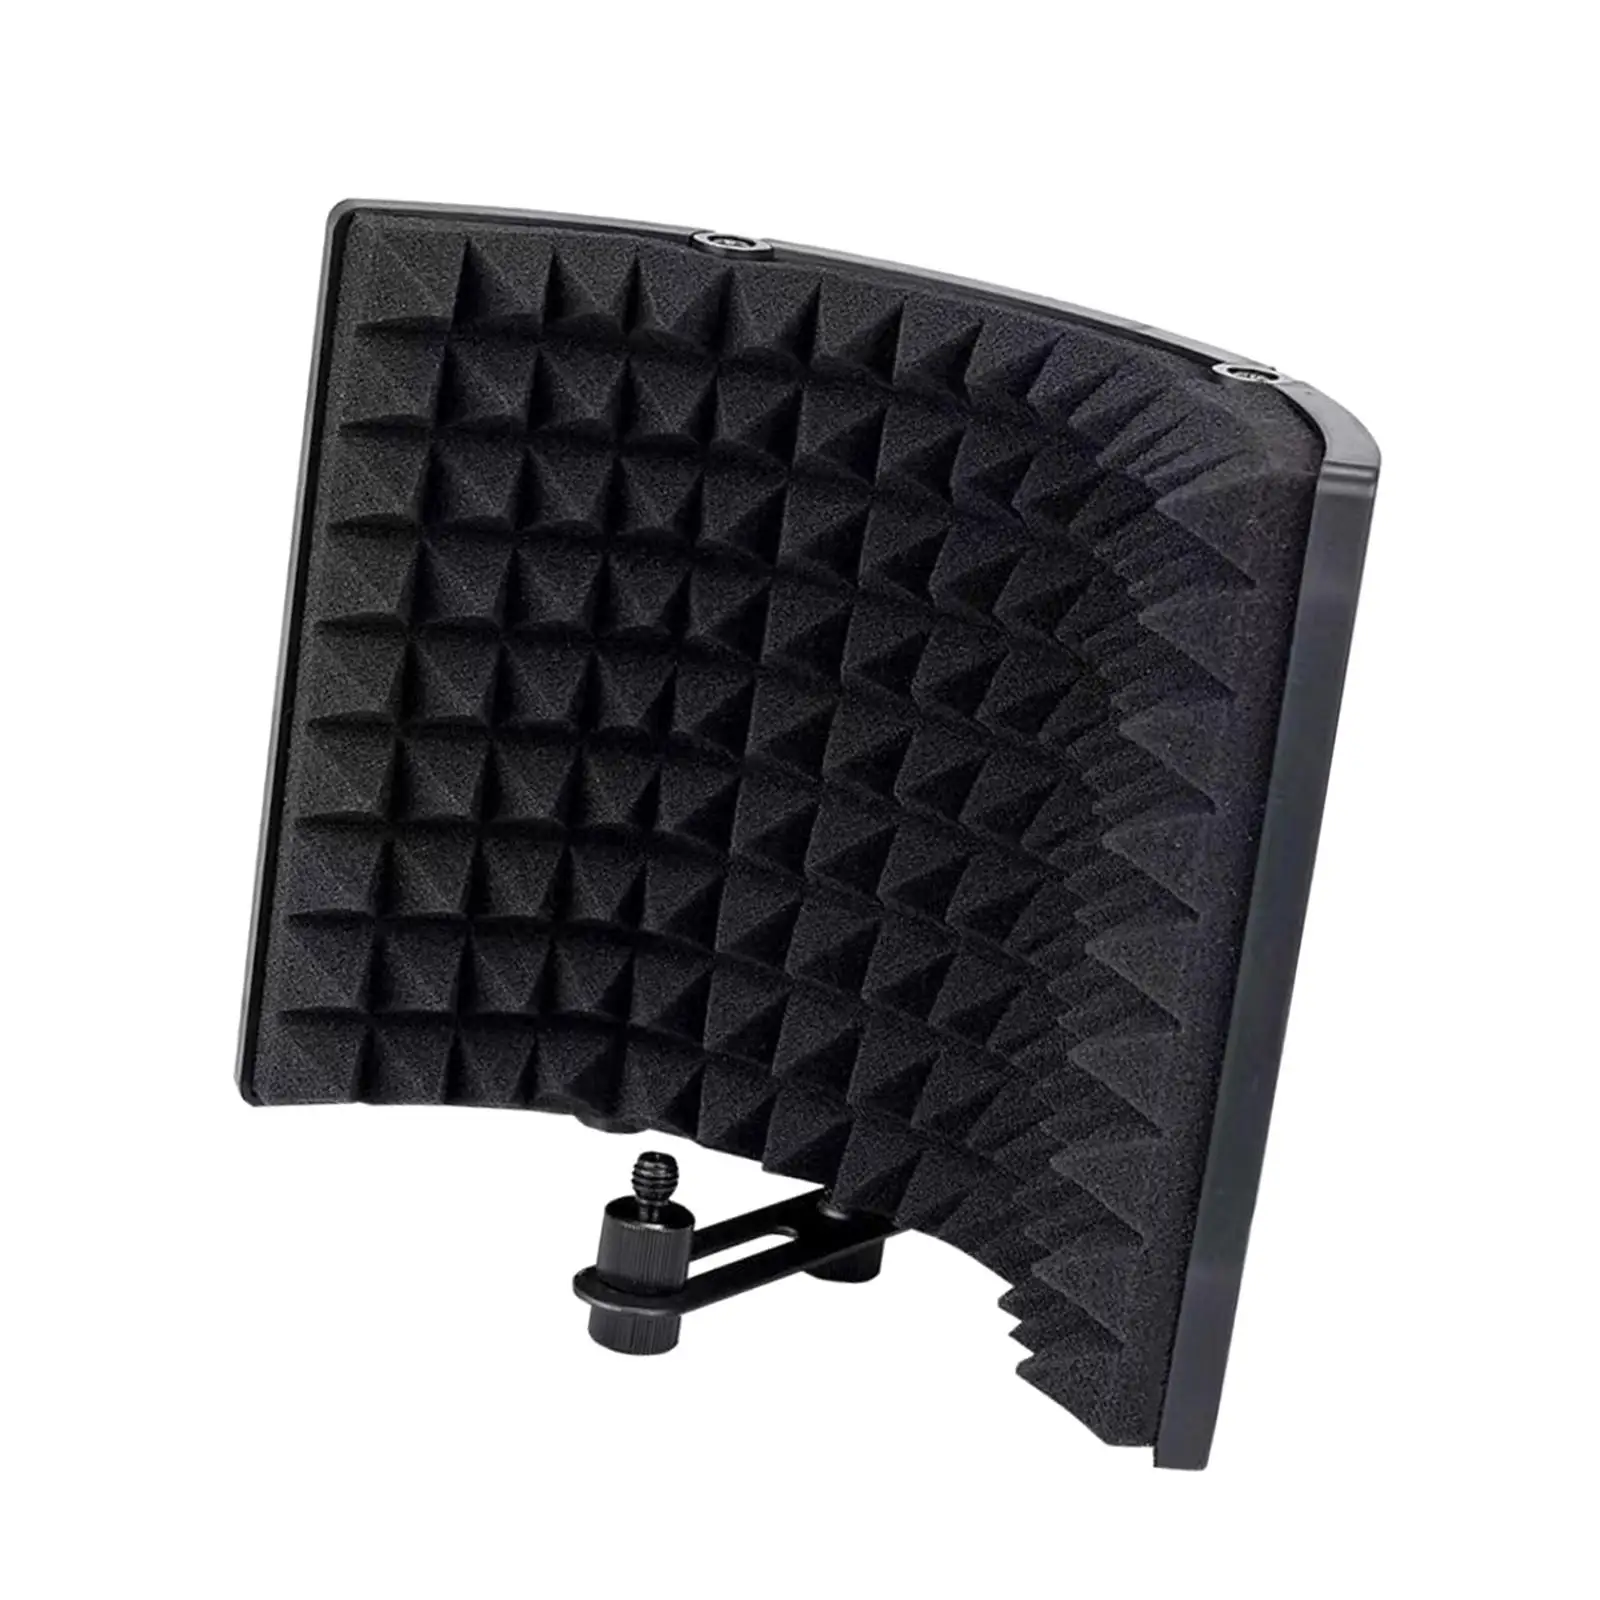 3 Panels Microphone Isolation Shield Adjustable for Singing Podcasts